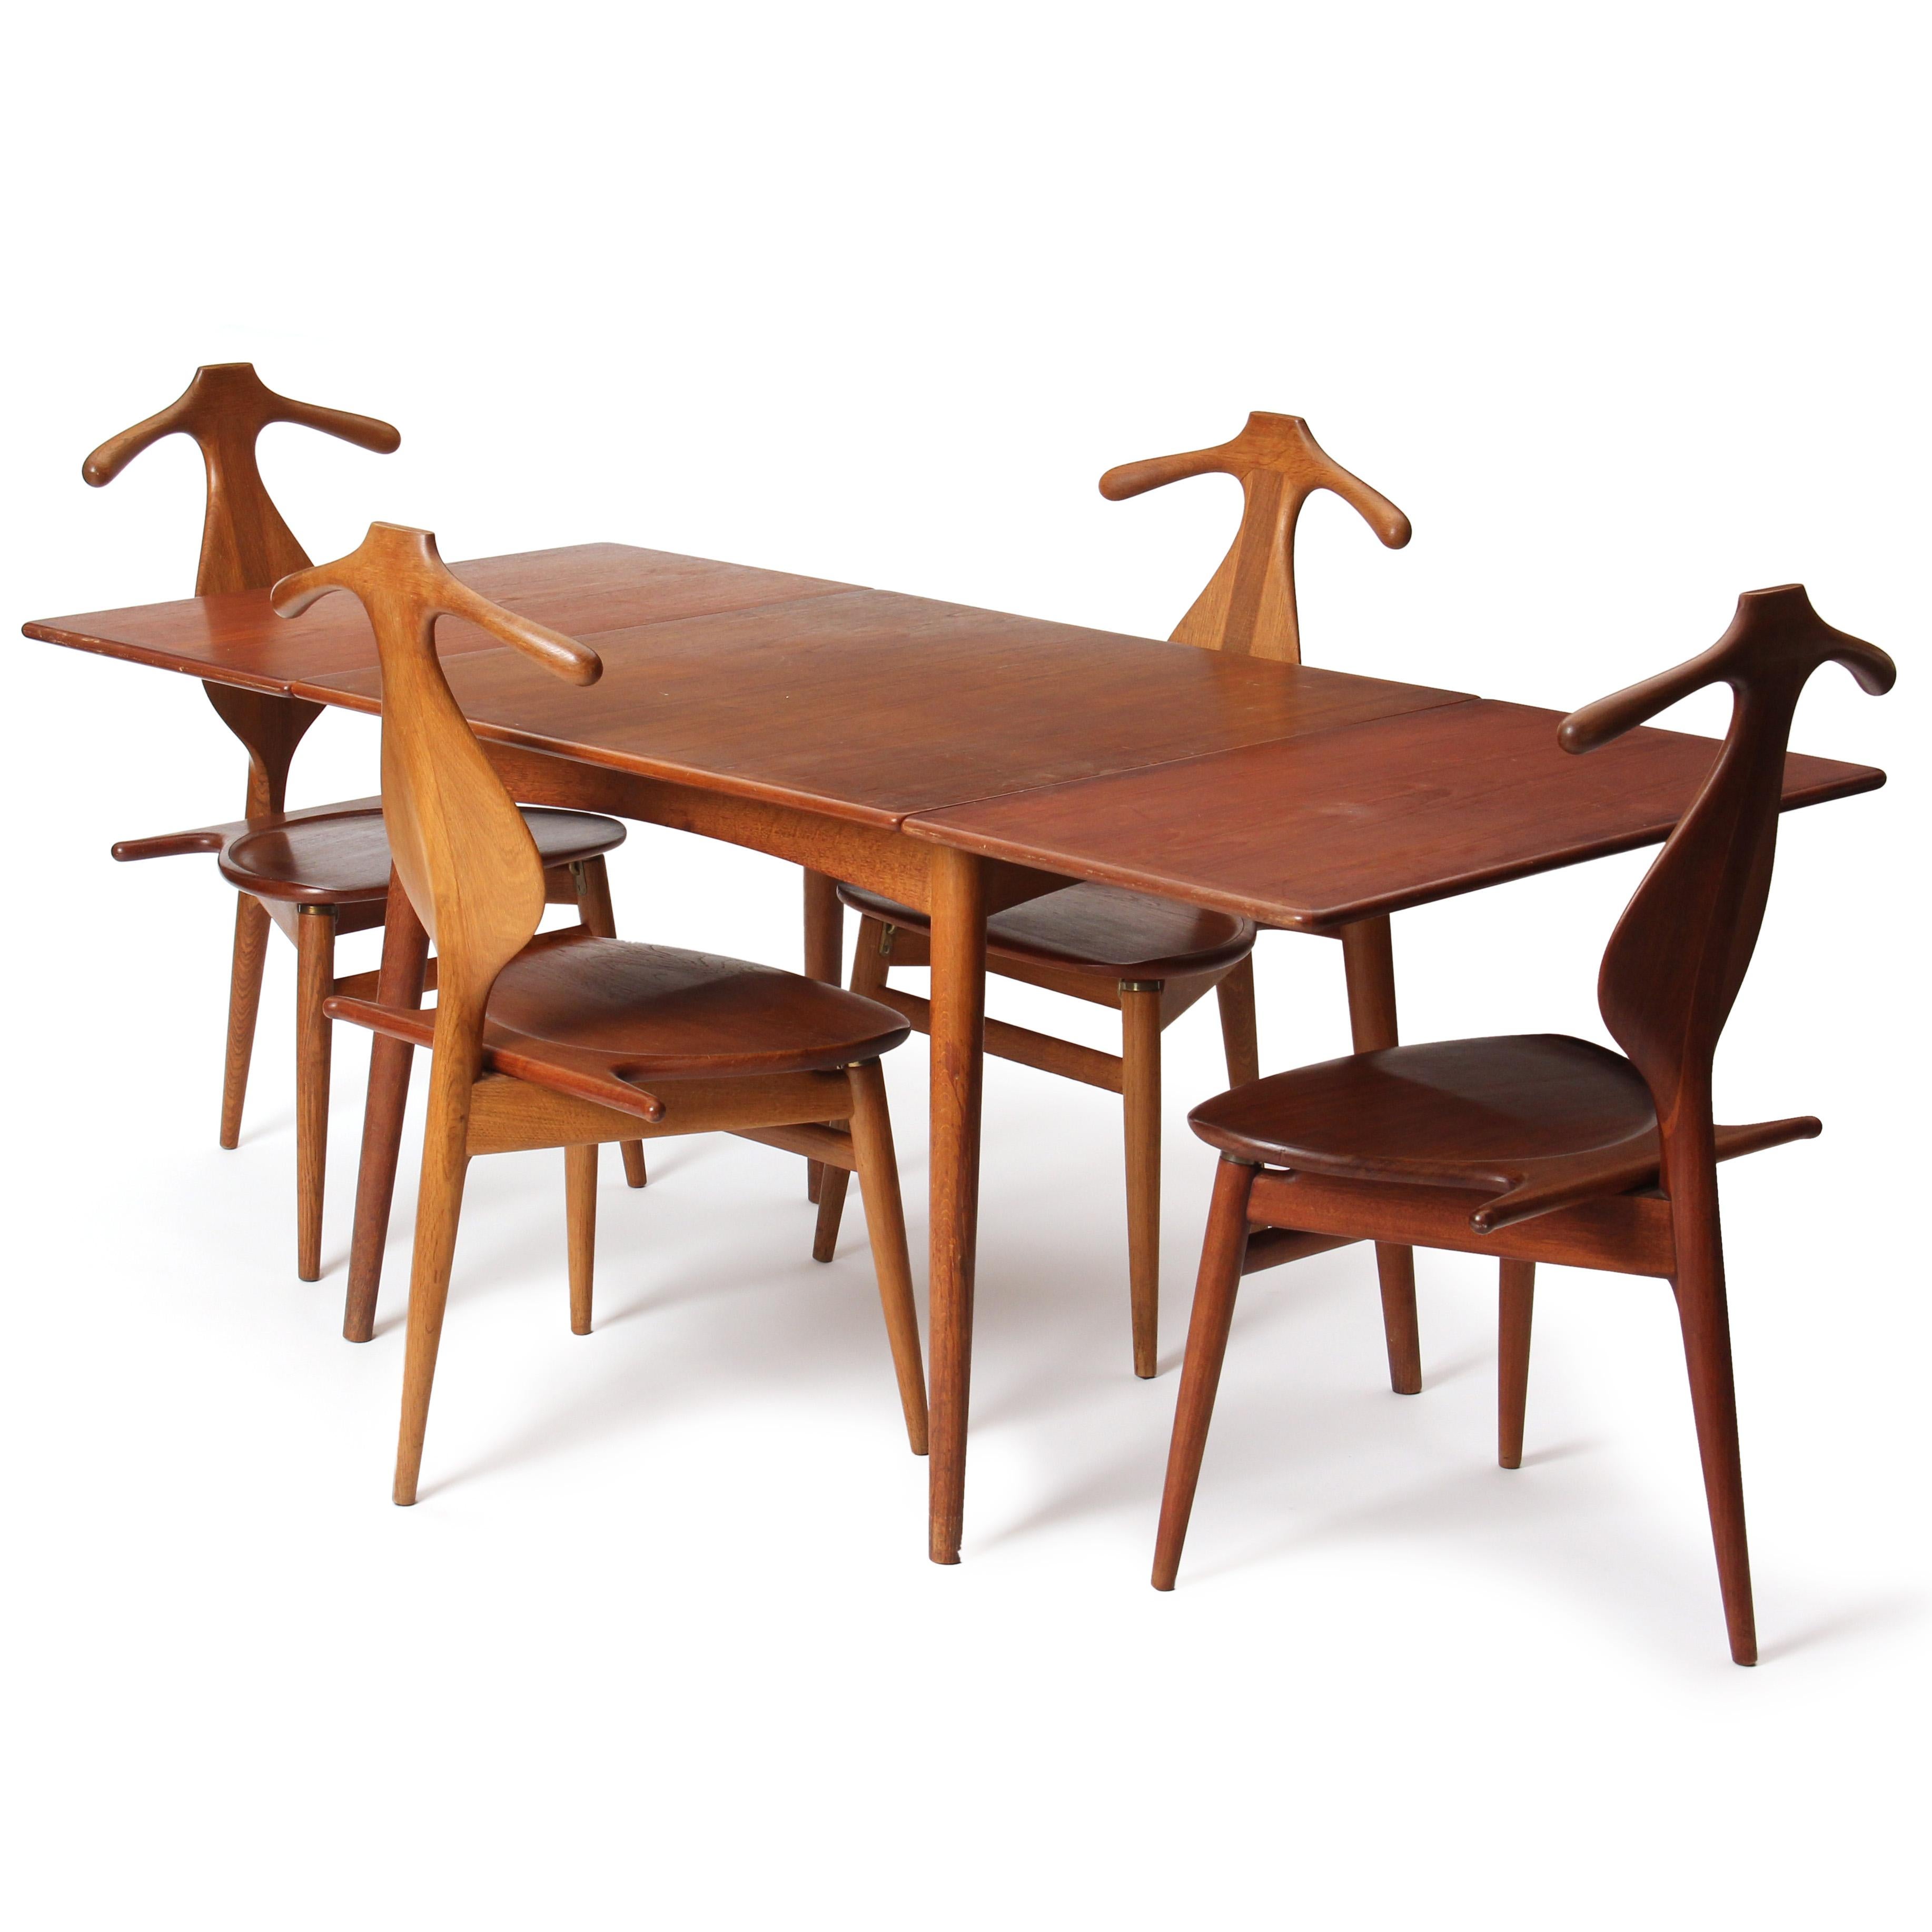 Mid-20th Century Drop-leaf Dining Table by Hans J. Wegner for Andreas Tuck For Sale